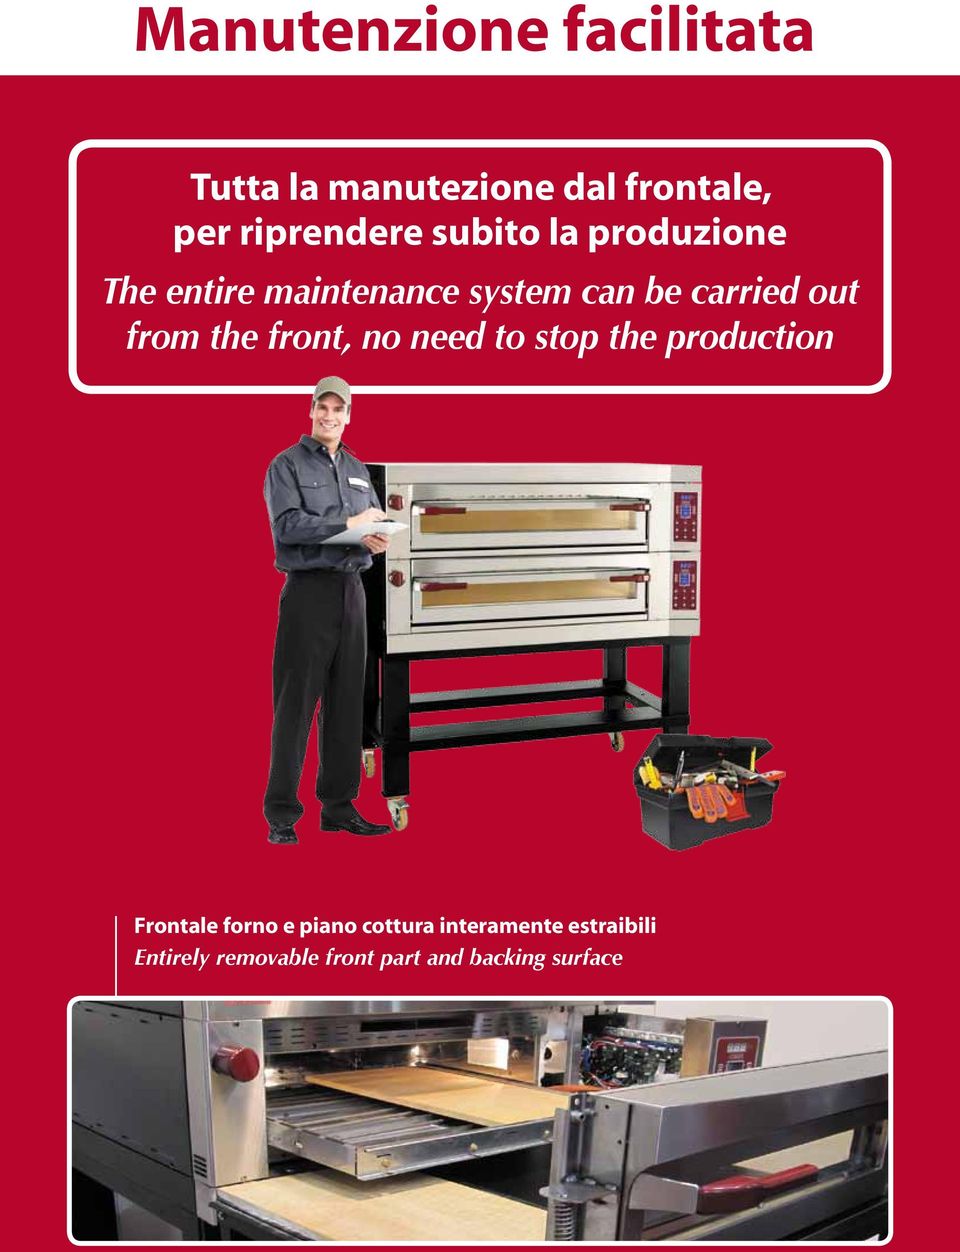 from the front, no need to stop the production Frontale forno e piano